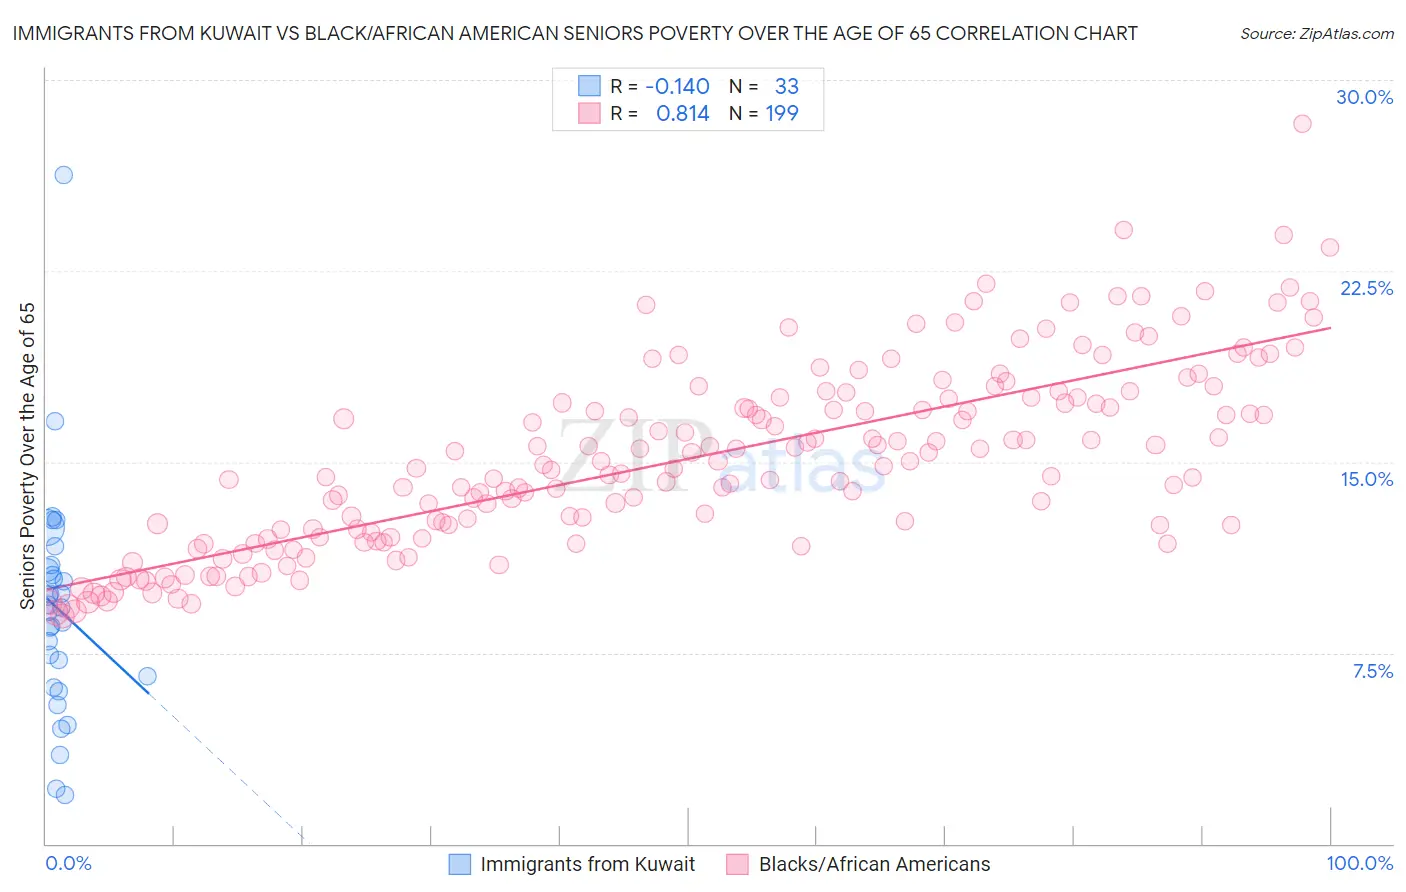 Immigrants from Kuwait vs Black/African American Seniors Poverty Over the Age of 65